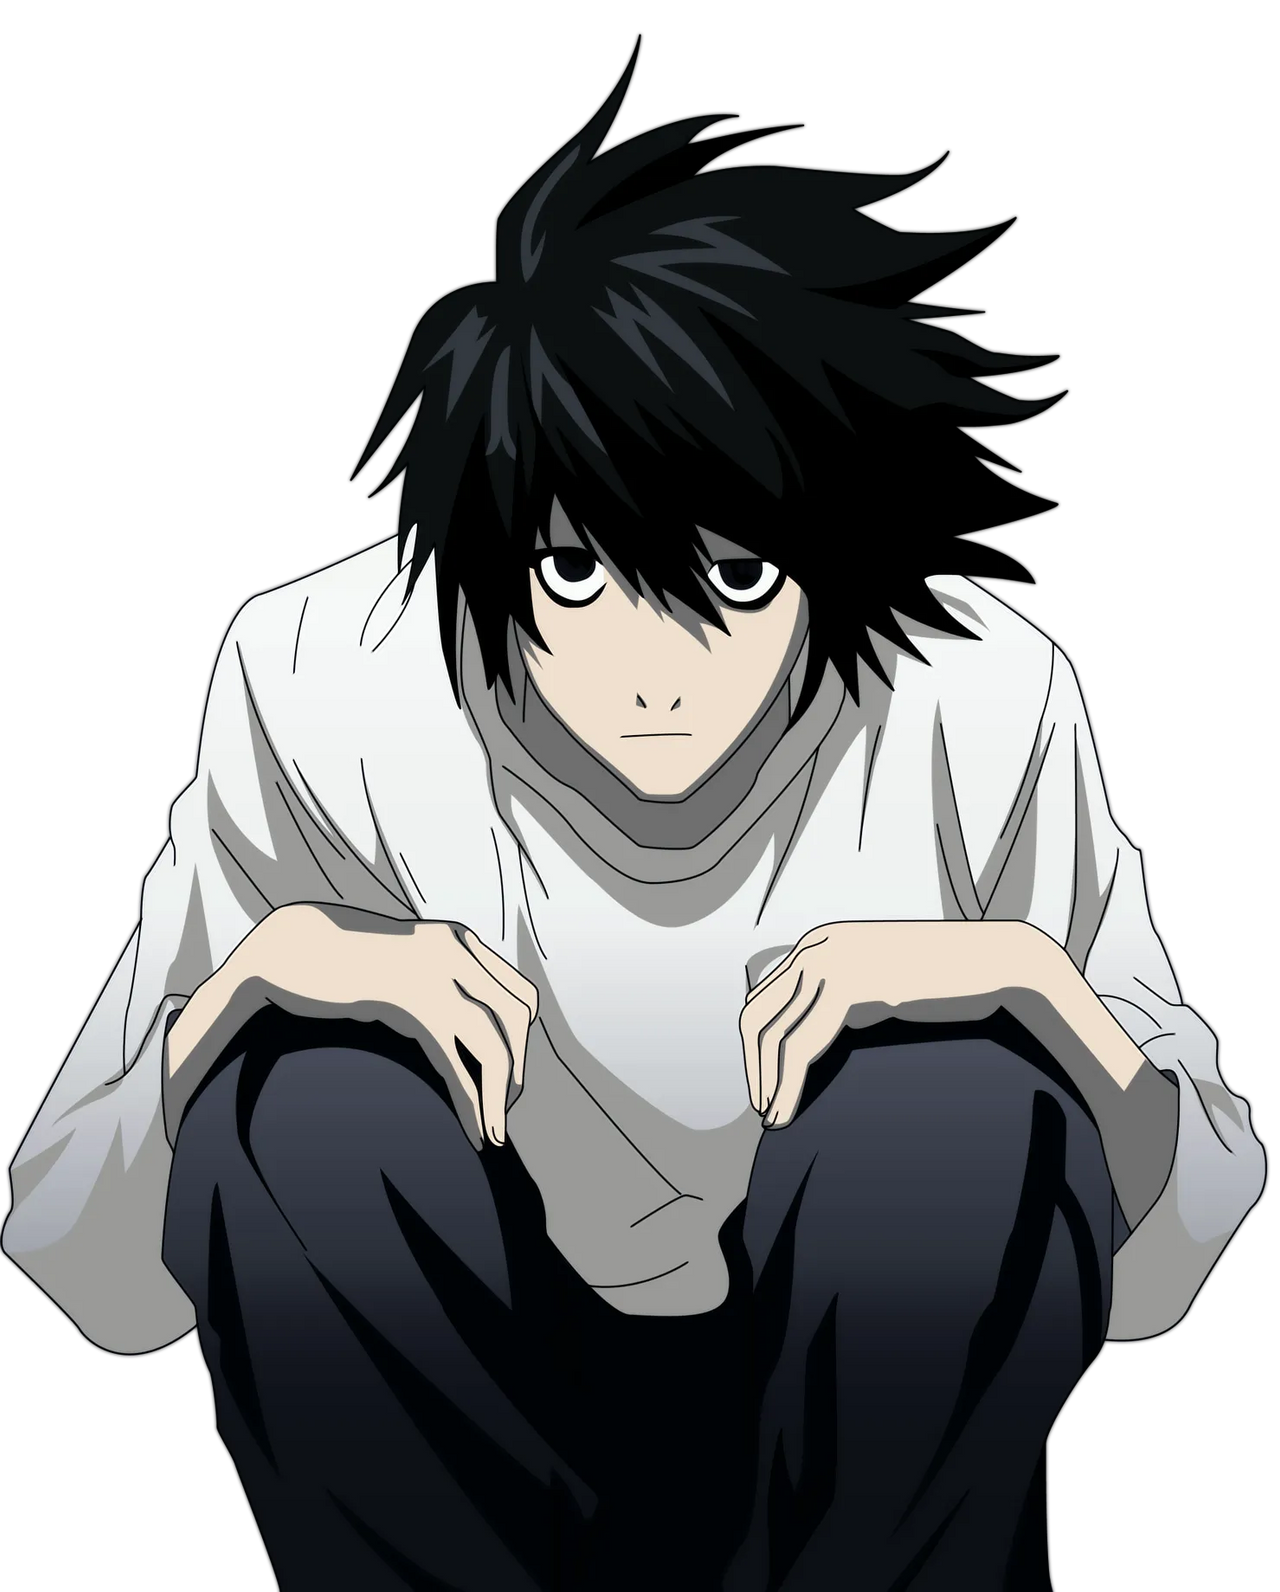 L Lawliet (Death Note) - Featured 